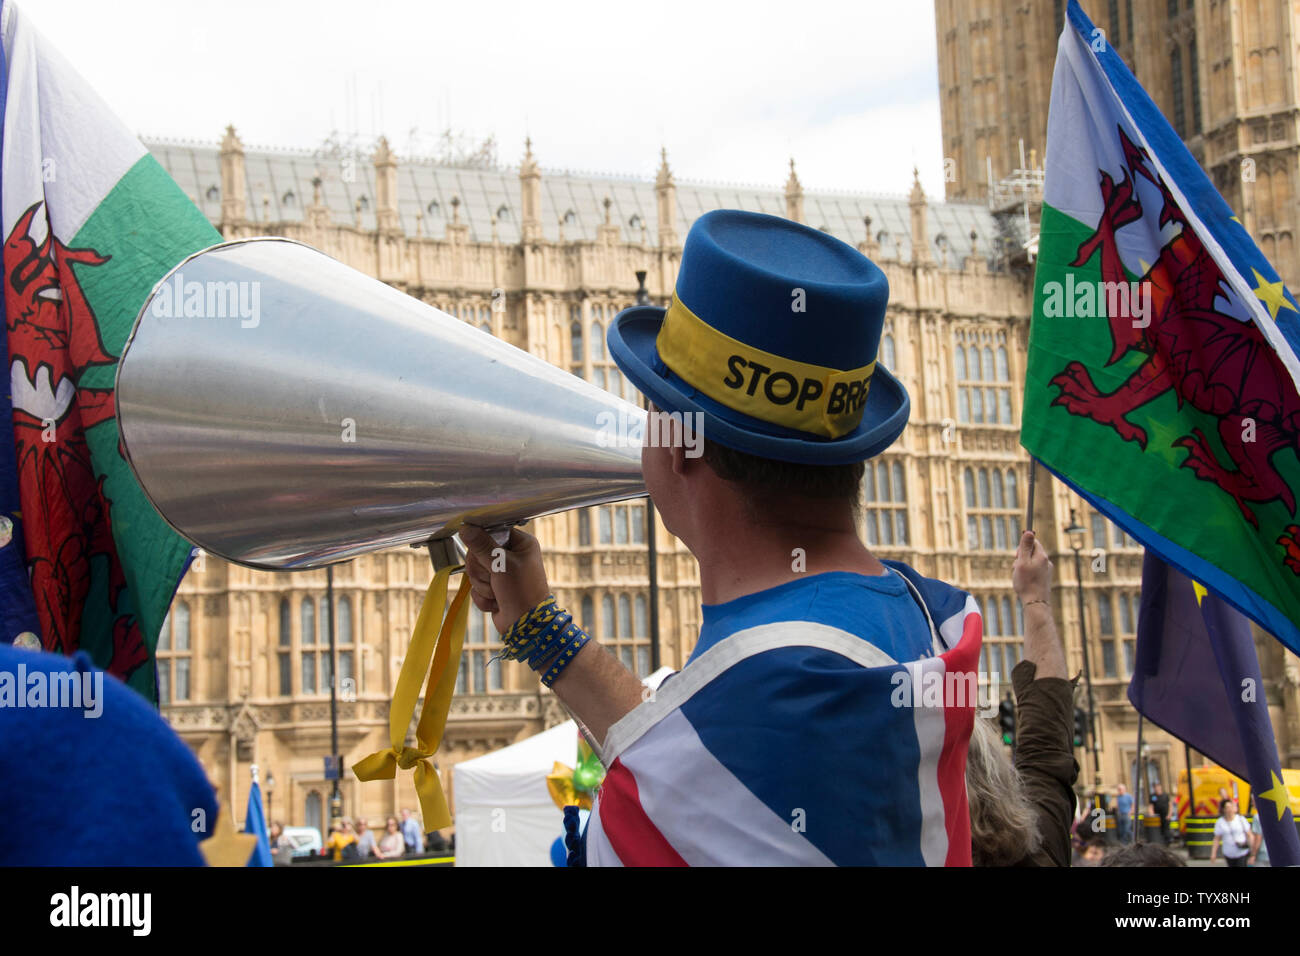 26 June 2019 - Opposite Parliament, London, UK - 'Stop Brexit' Steven Bray with megaphone at his birthday party. Stock Photo